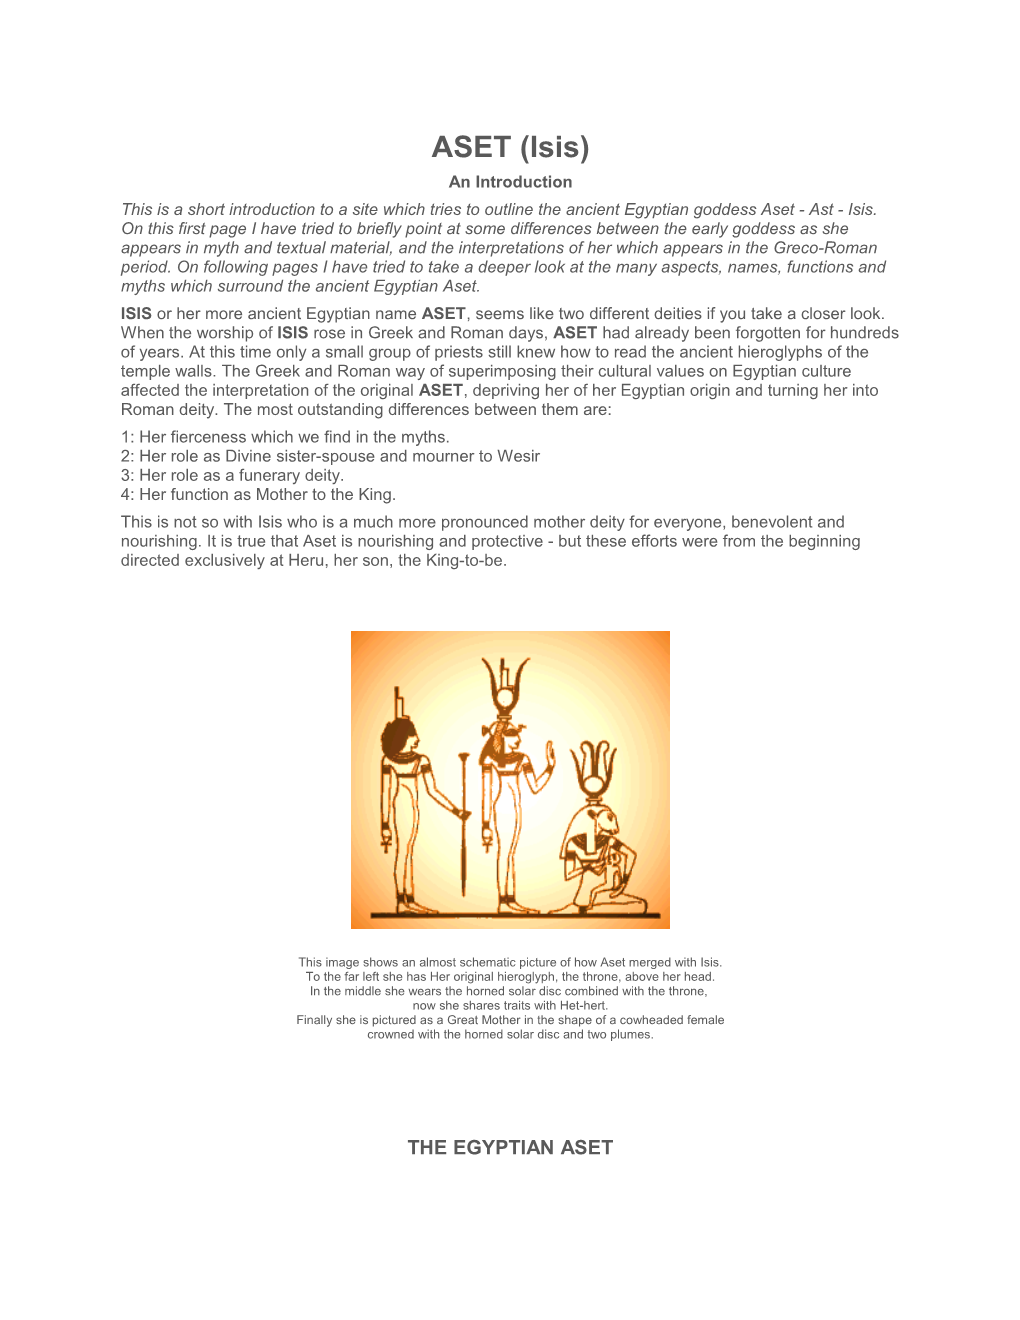 This Is a Short Introduction to a Site Which Tries to Outline the Ancient Egyptian Goddess